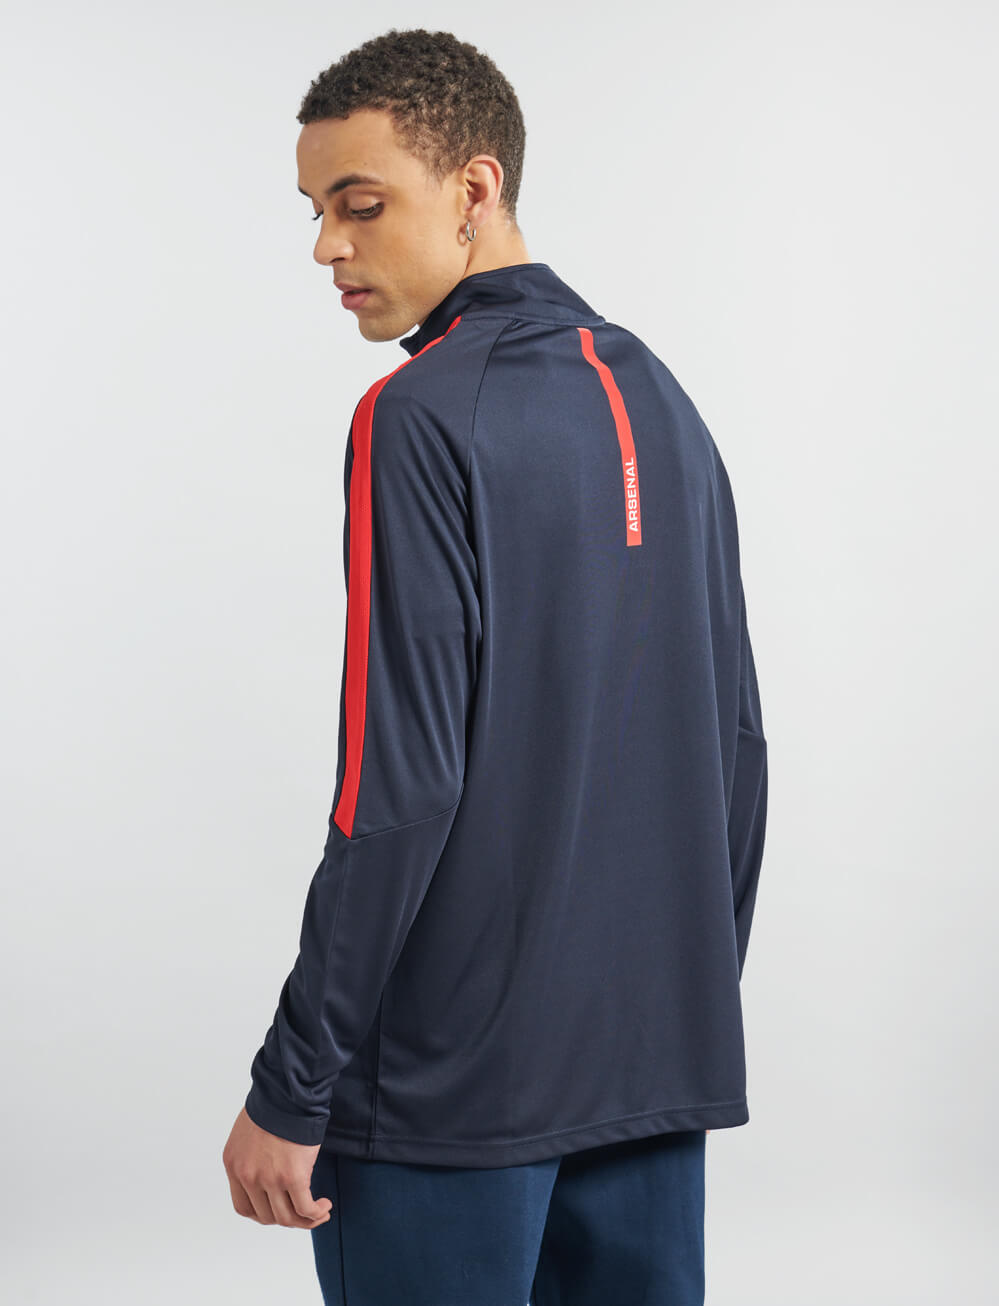 Official Arsenal 1/4 Zip Track Top - Navy - The World Football Store